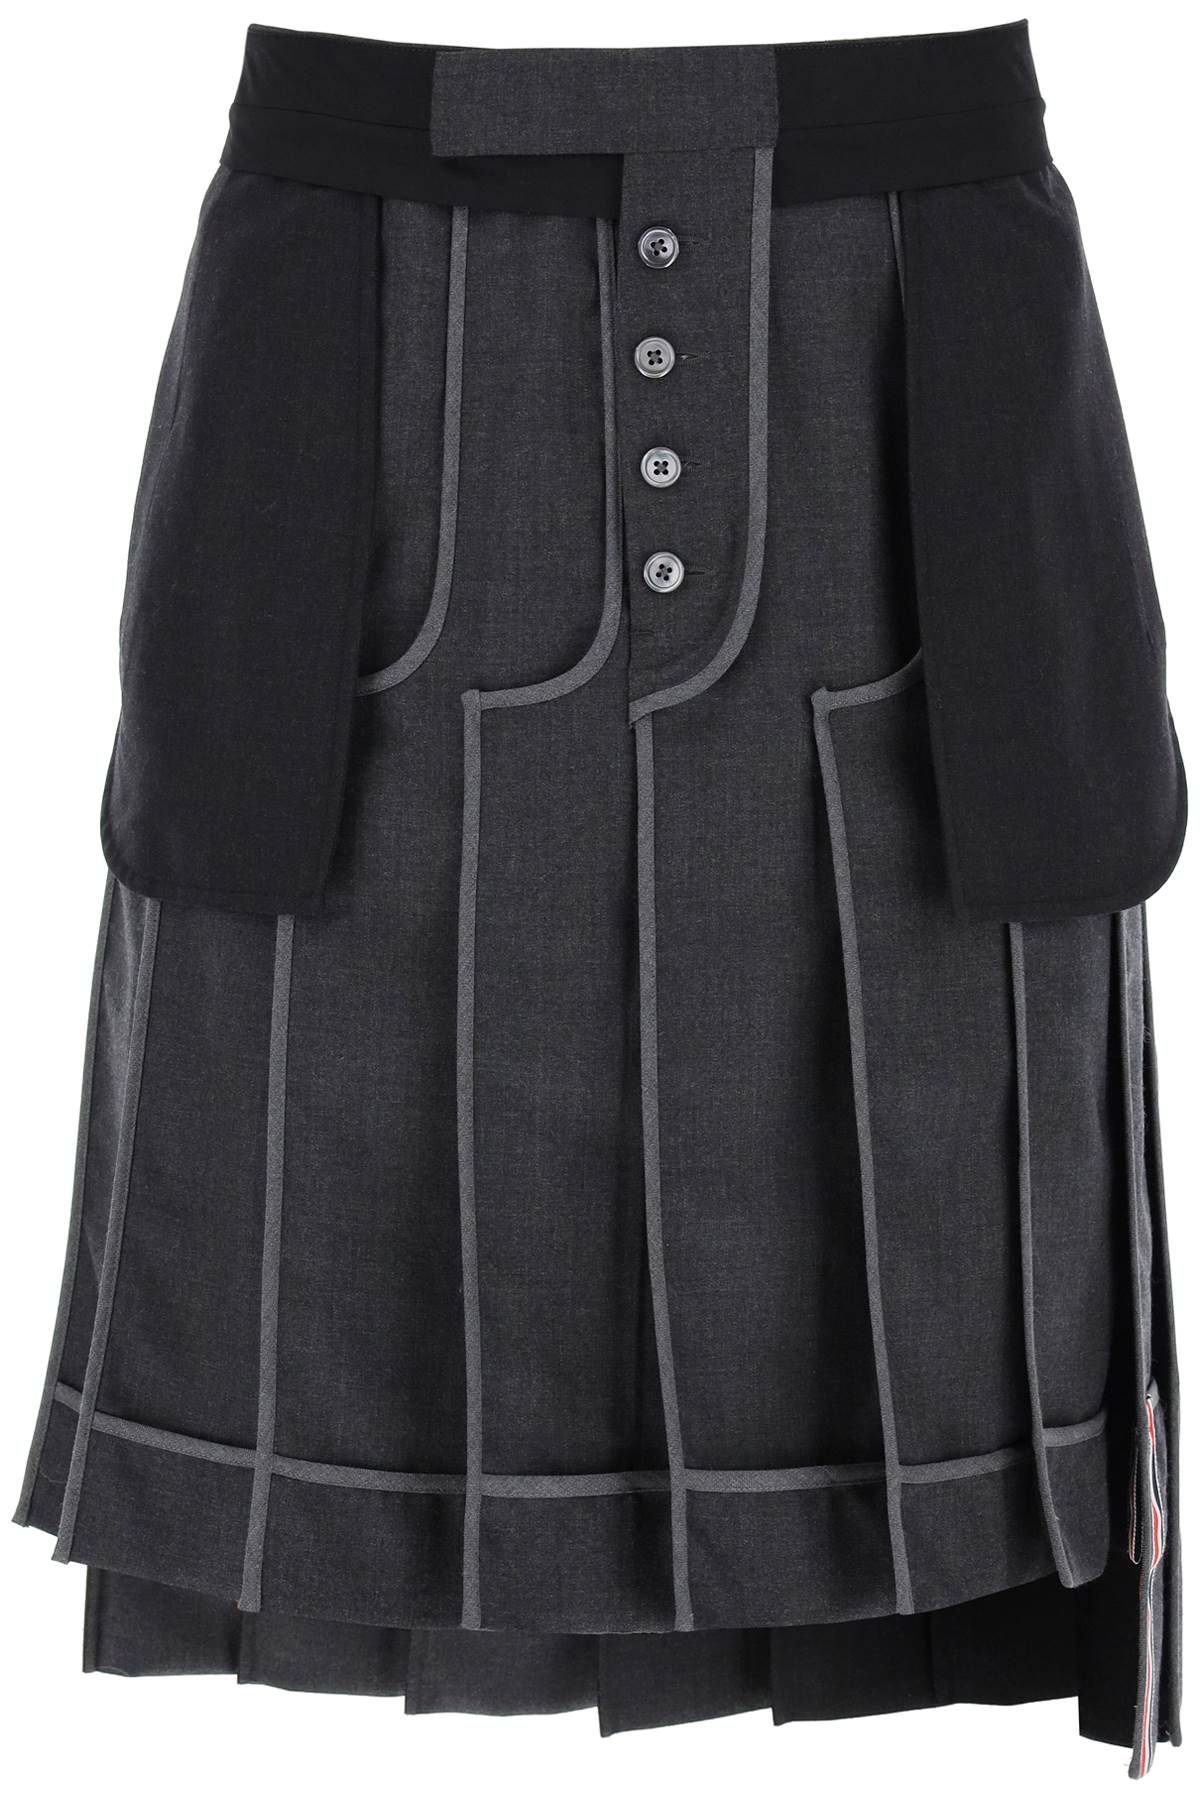 Thom browne inside-out pleated skirt-0